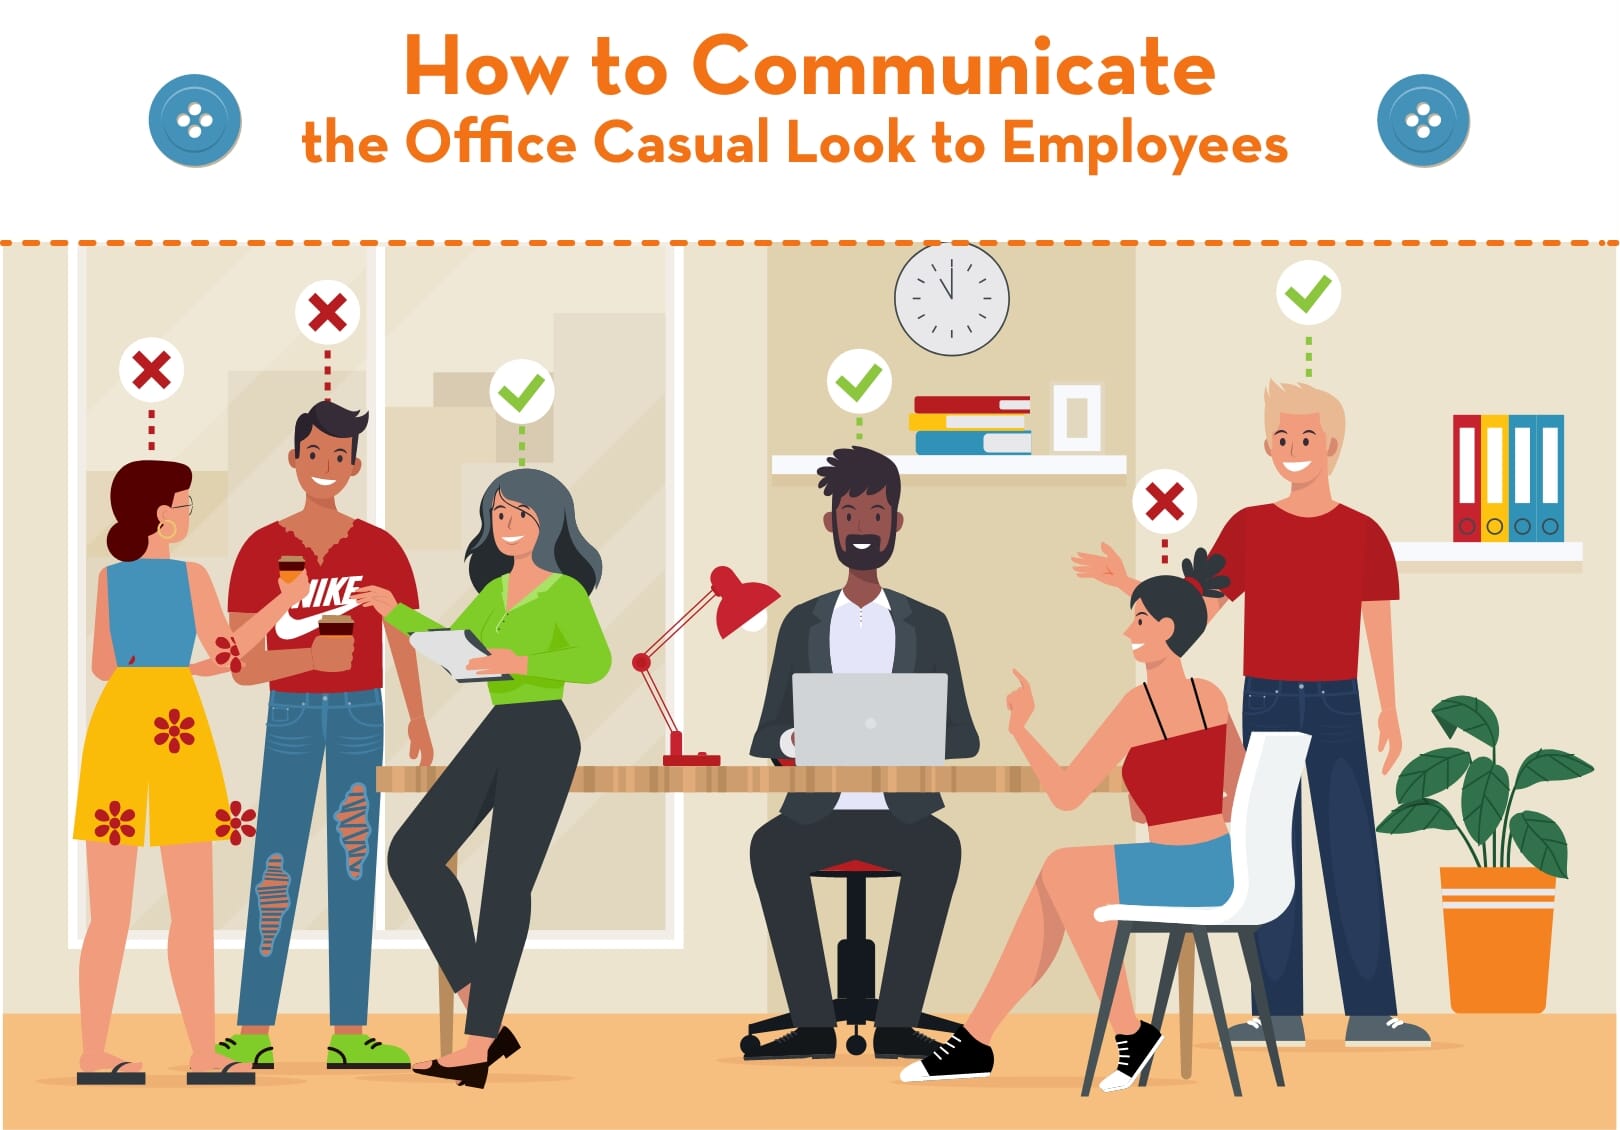 How to Communicate the Office Casual Look to Employees